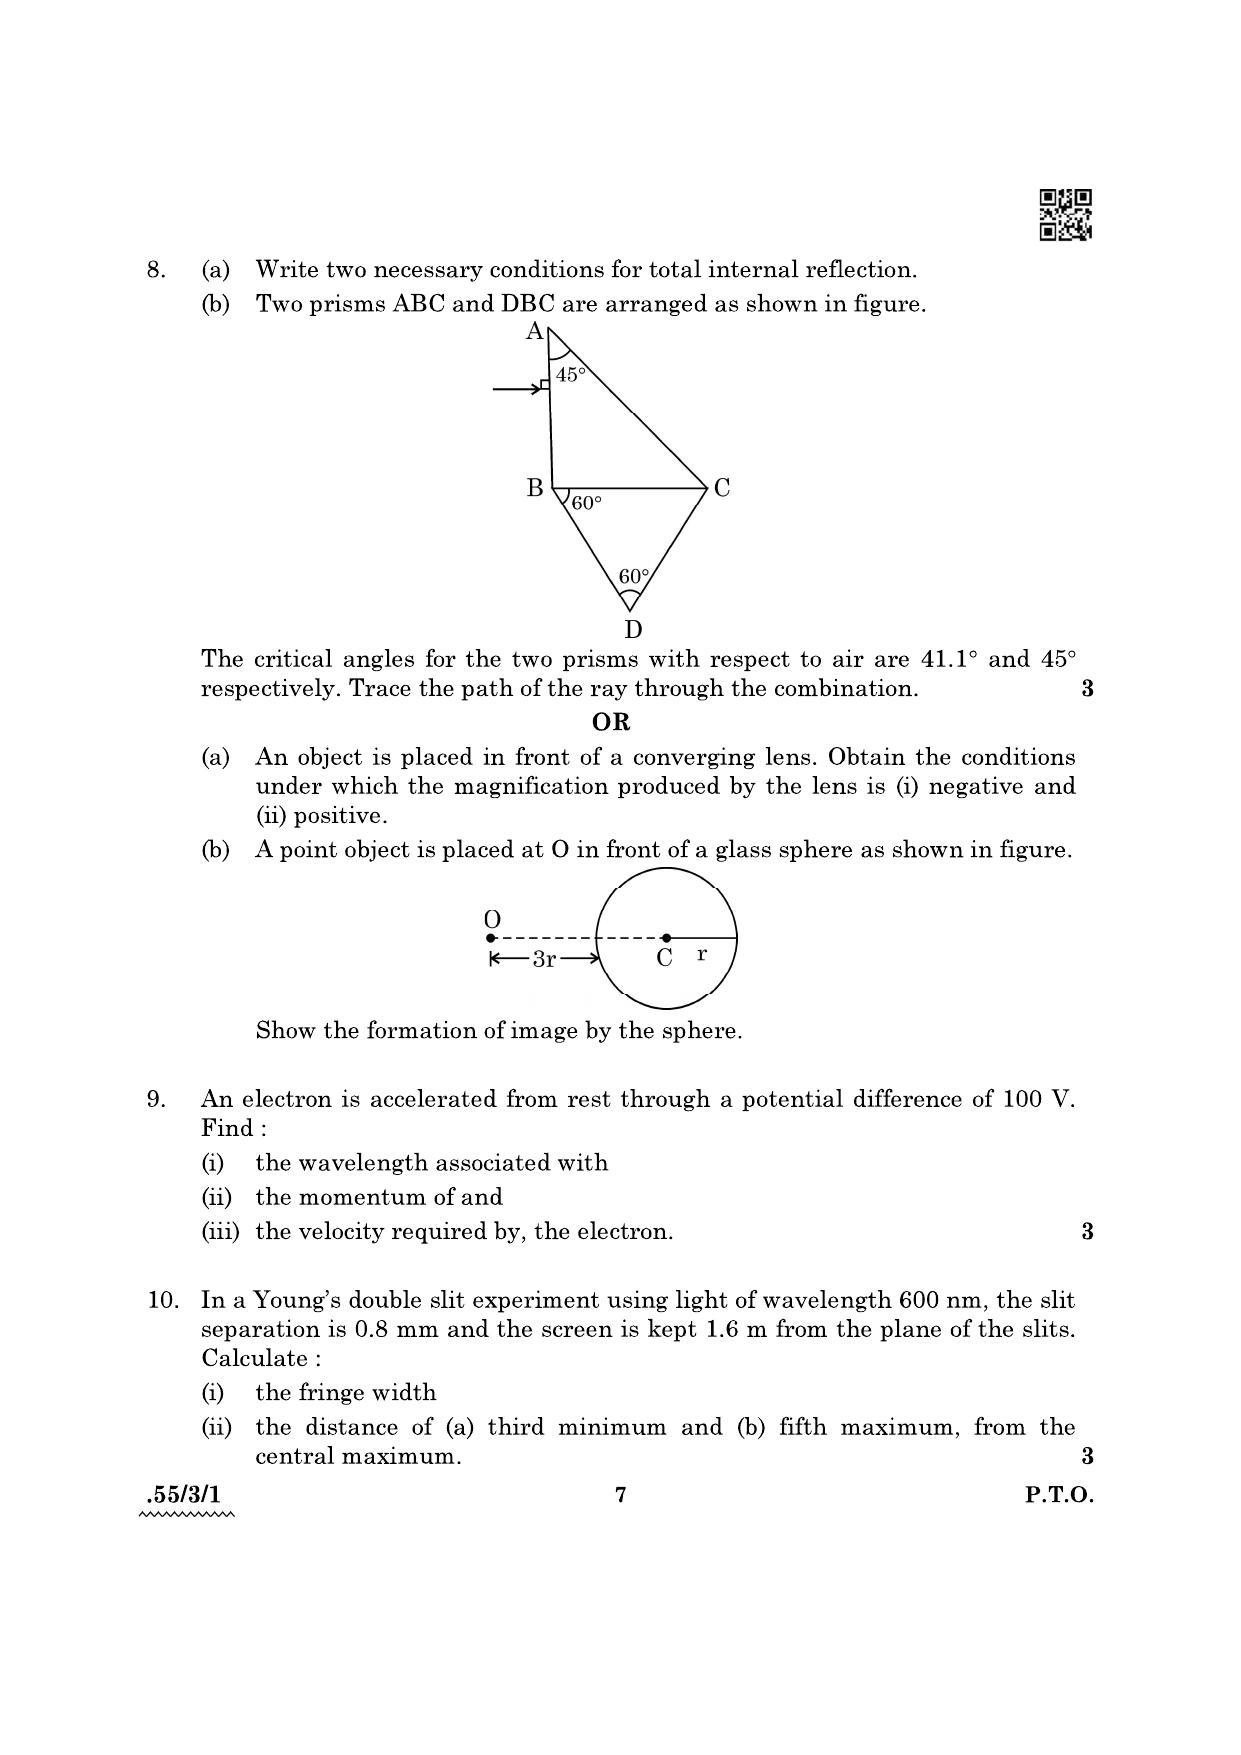 CBSE Class 12 55-3-1 Physics 2022 Question Paper - Page 7